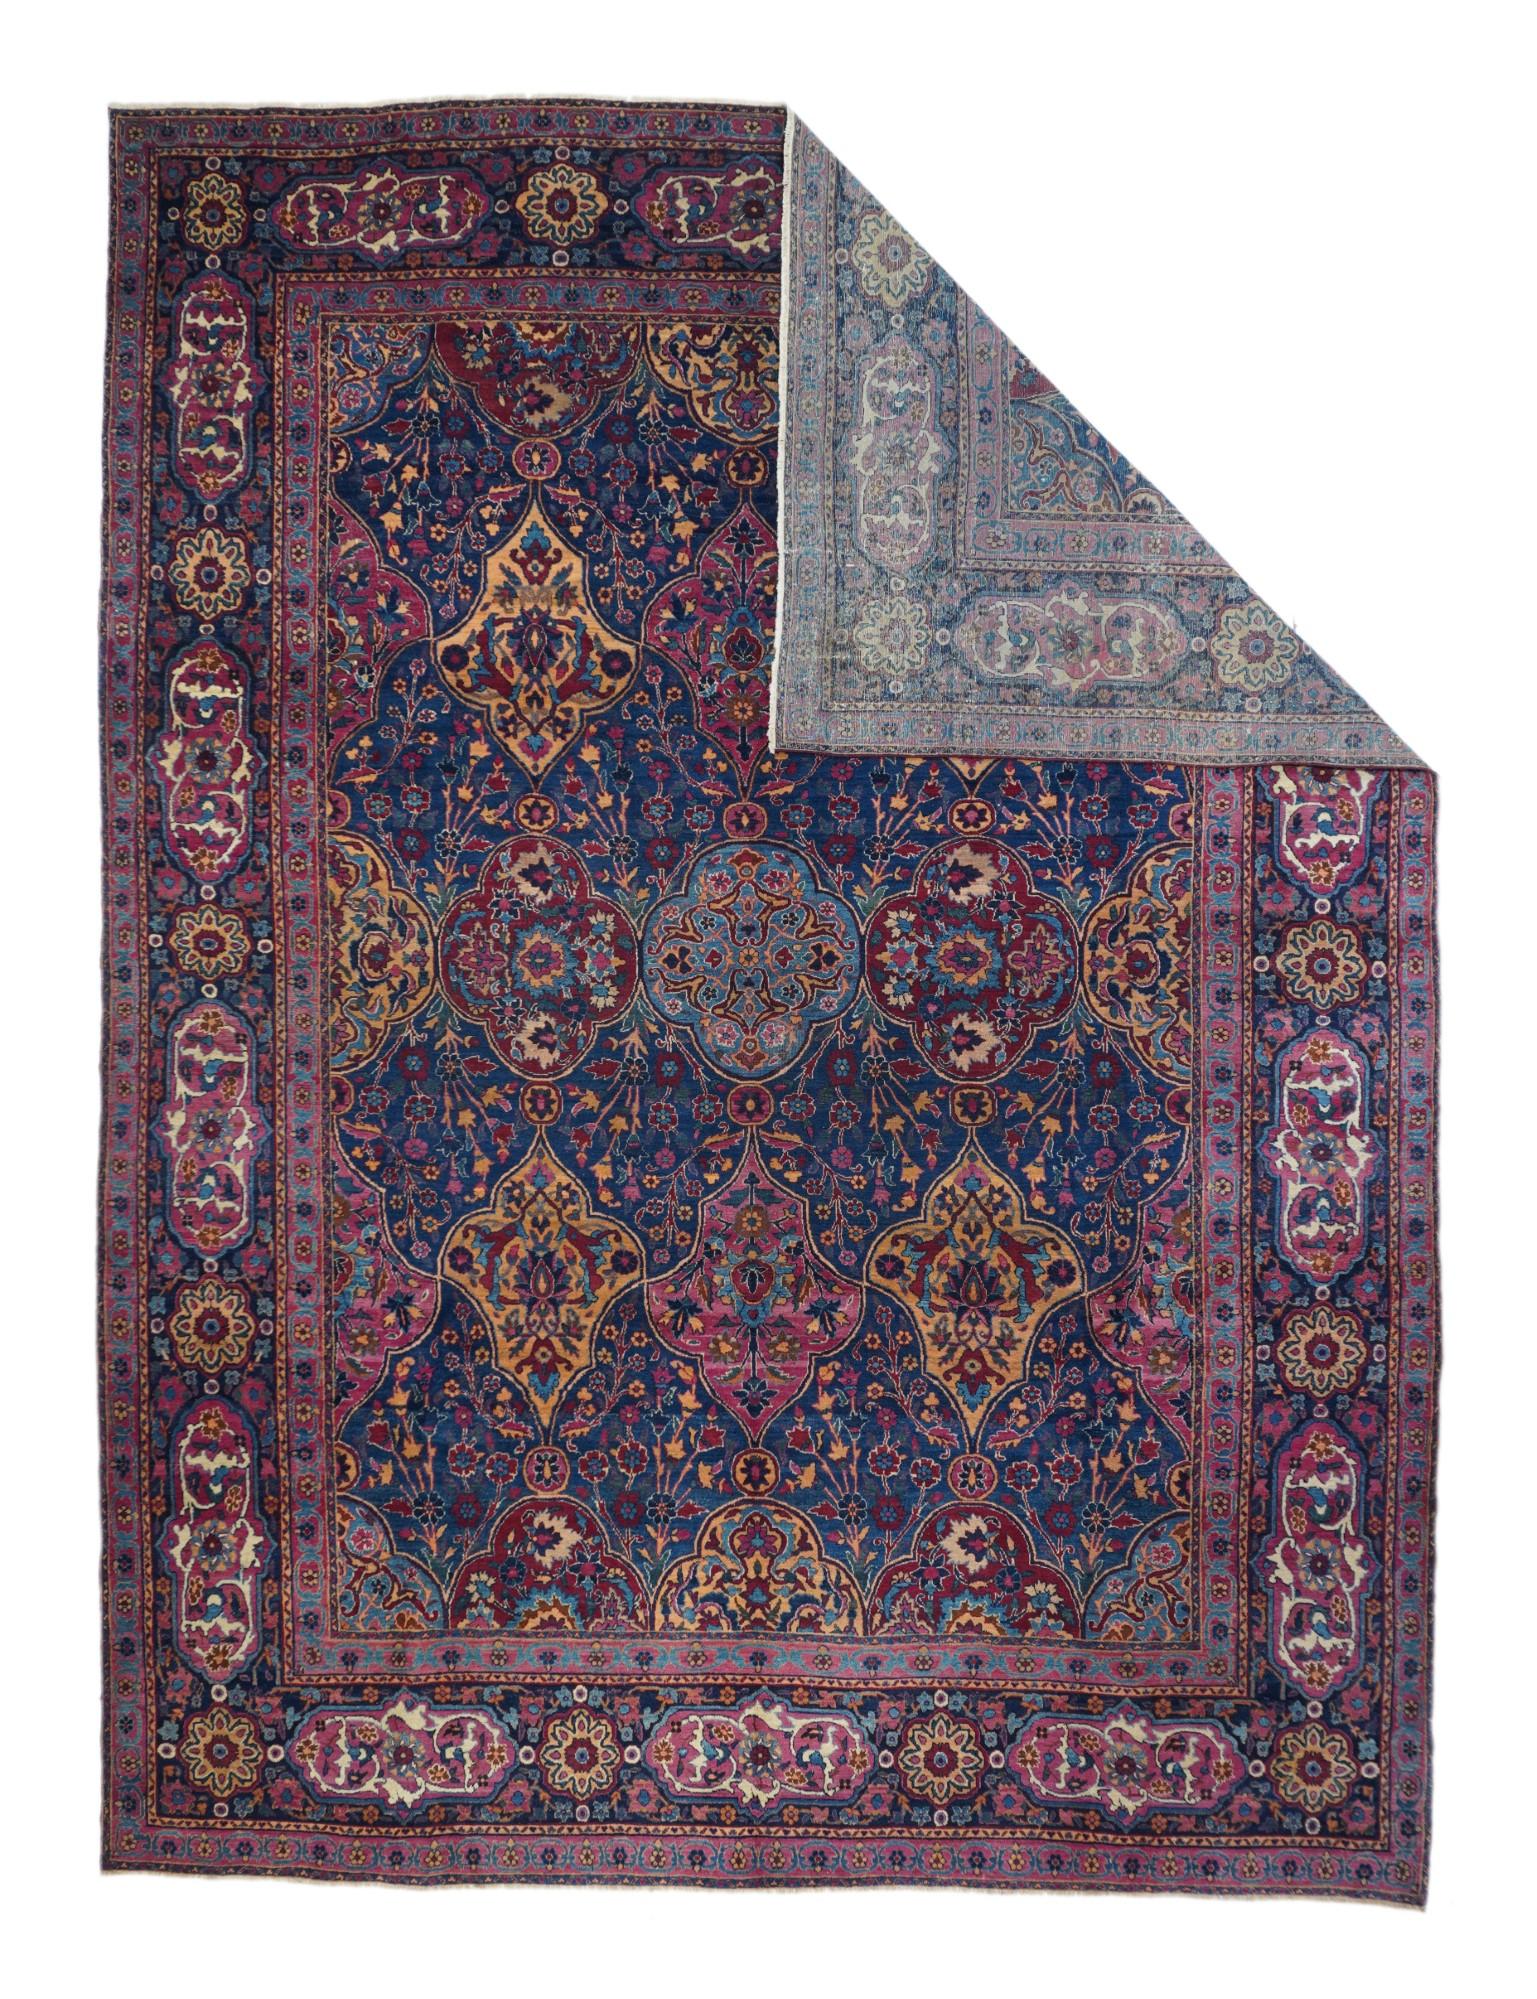 This 1920’s SE Persian city carpet shows a royal blue field patterned by quadrilobes and shield cartouches in light blue, straw, teal and wine red. A variety of flowering stems fills in the reserves while palmettes accent the major panels. Navy main